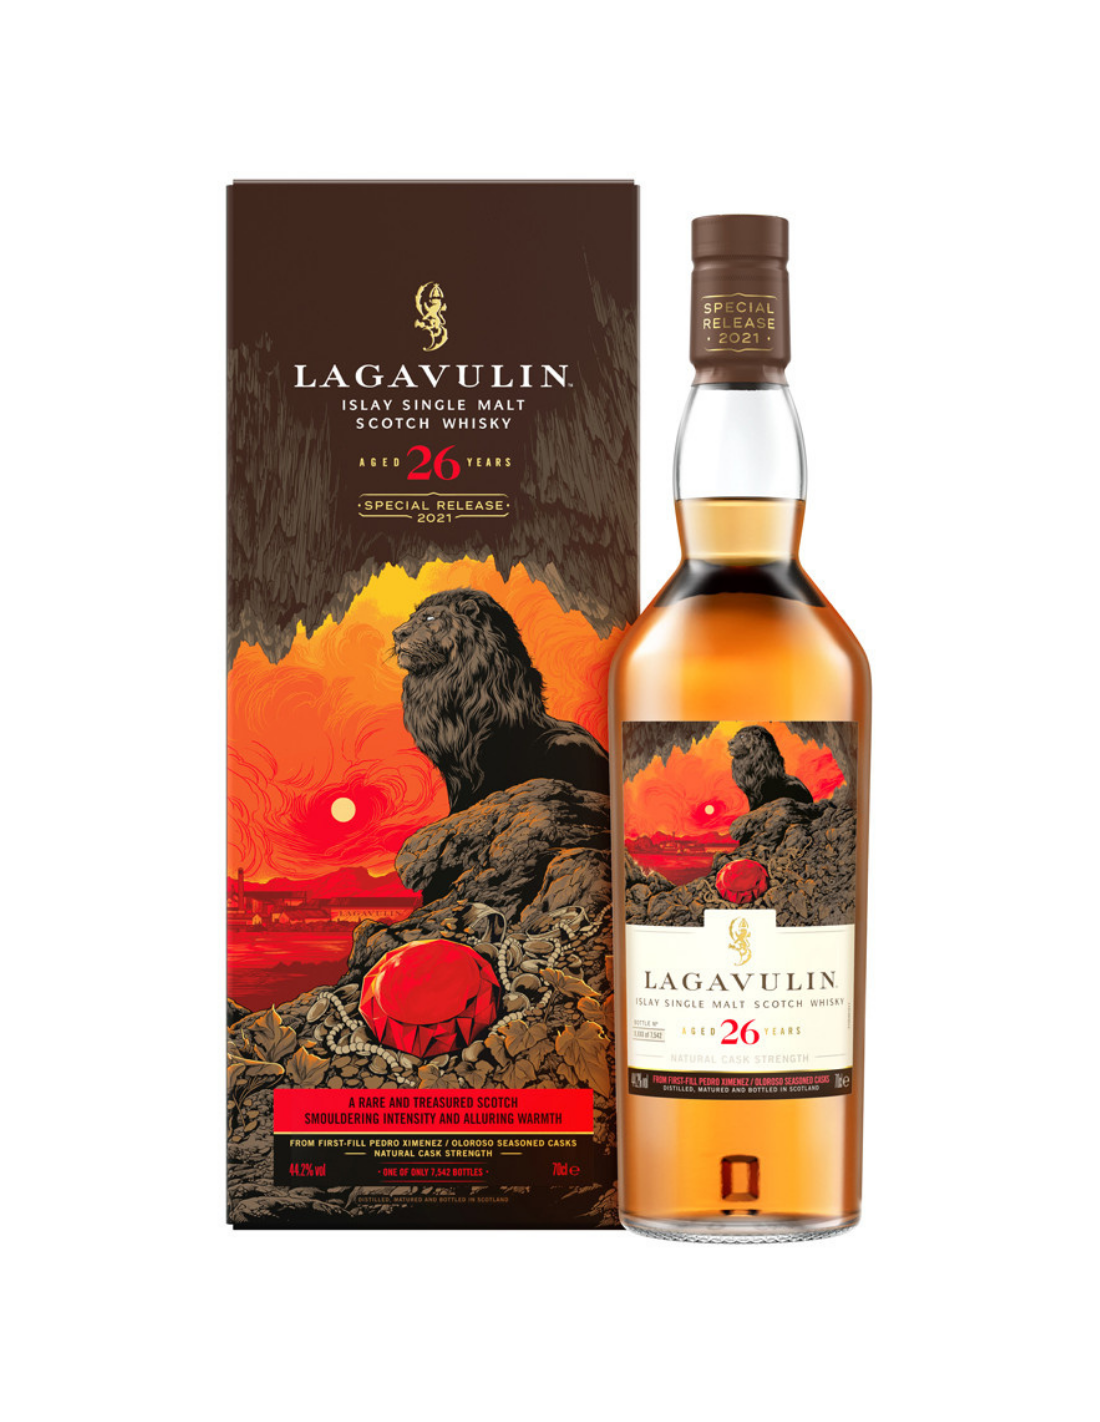 Whisky Lagavulin 26 Years Special Release 2021, 0.7L, 44.2% alc., Scotia alcooldiscount.ro